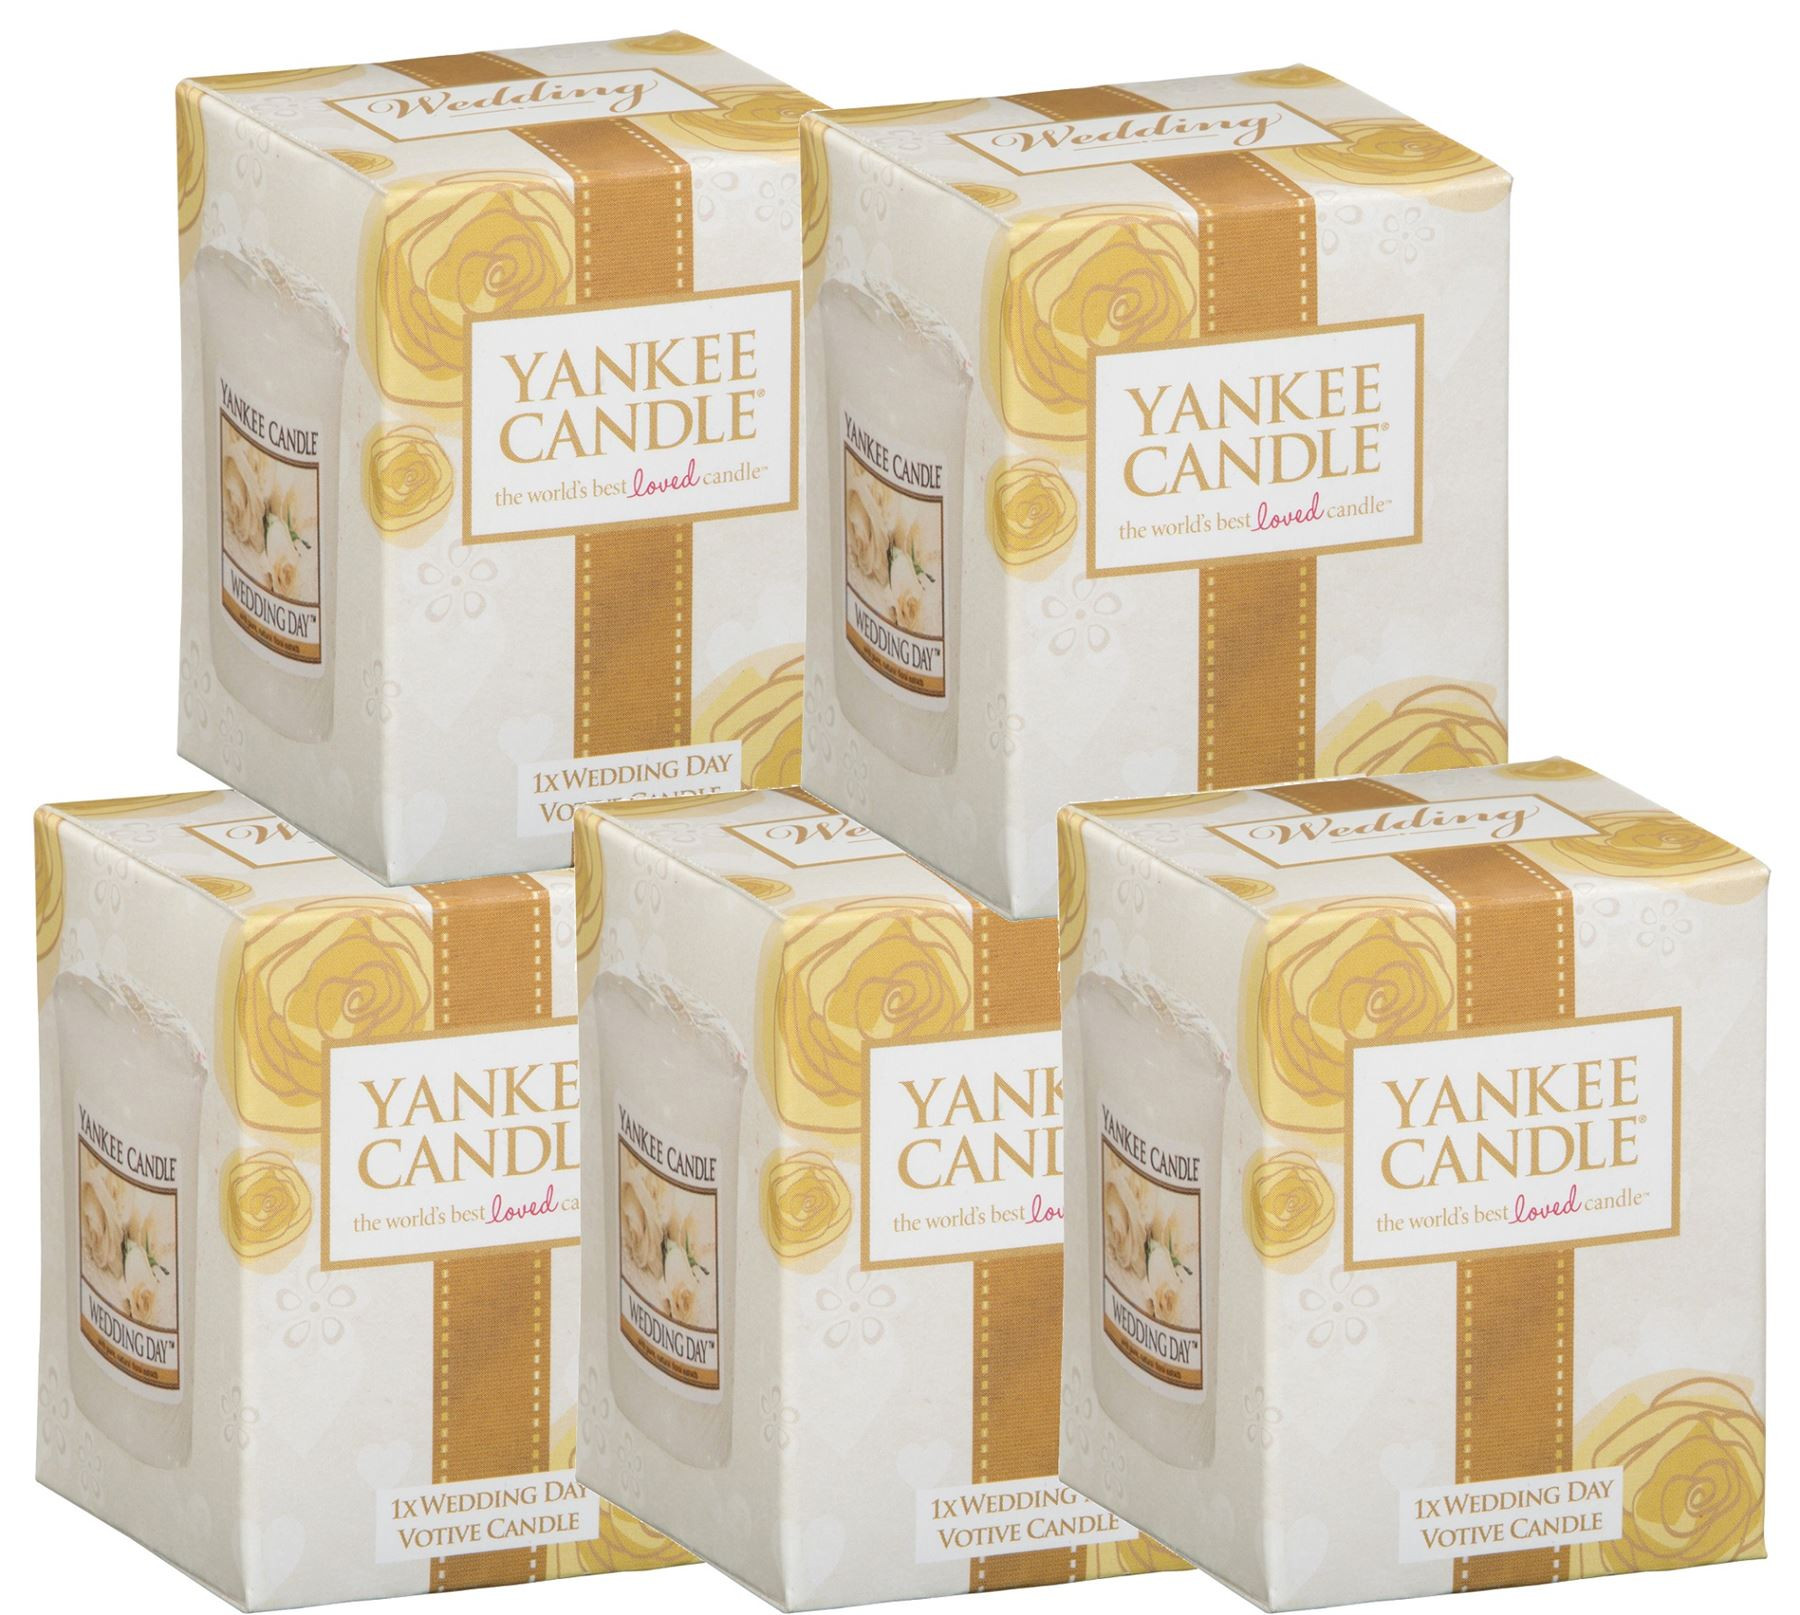 Yankee Candle Wedding Favors
 Yankee Candle Wedding Favour Boxed Wedding Day Votive